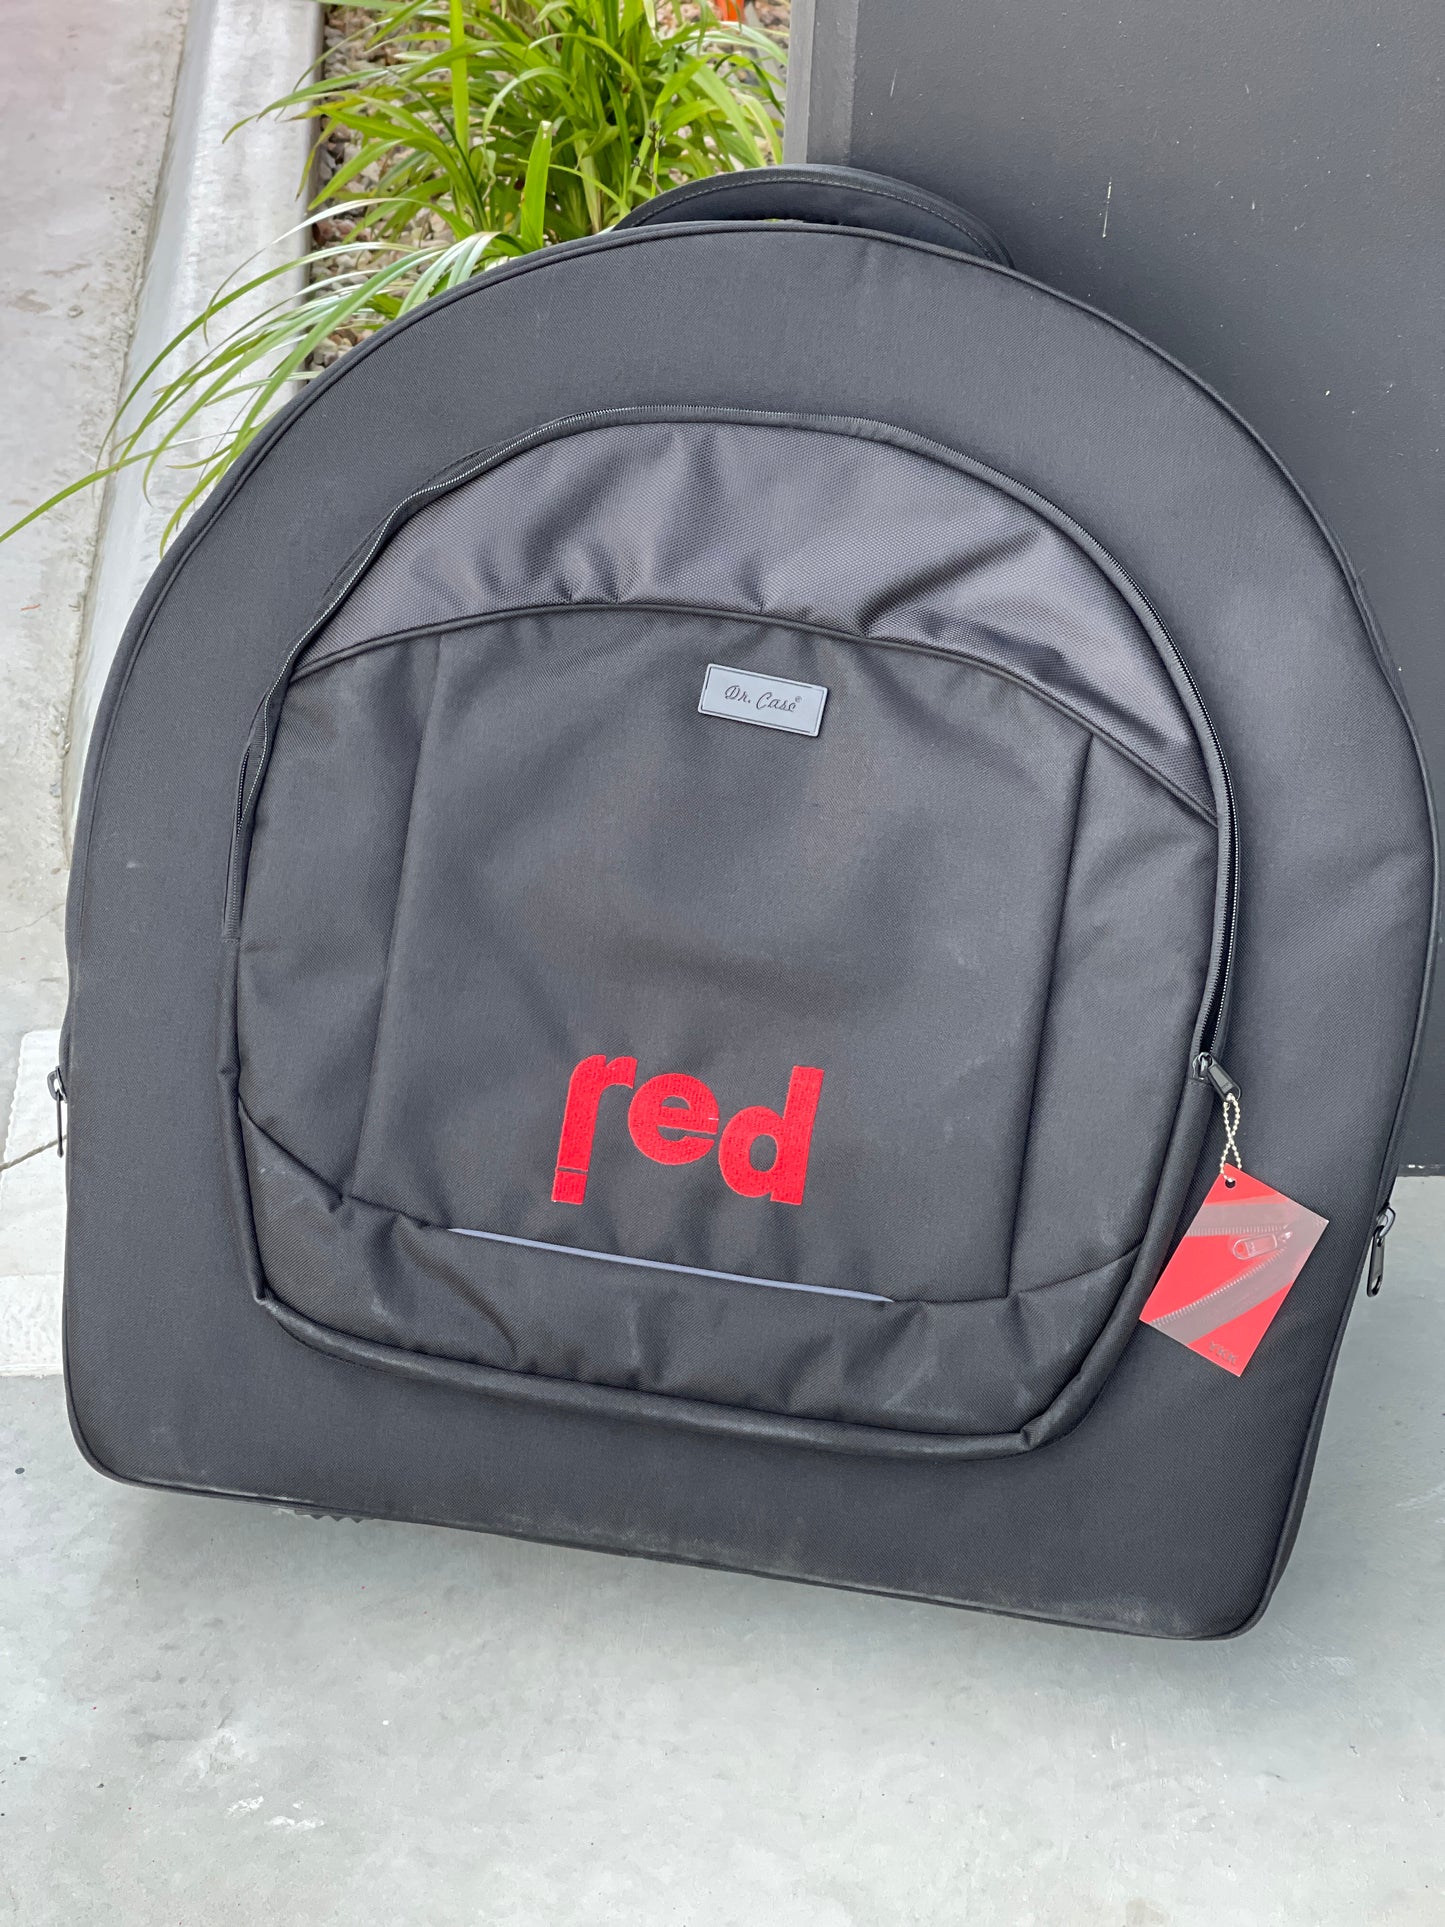 Red Cymbals Deluxe Cymbal Bag / Case Black Colour 22", 24" or 26" sizes.